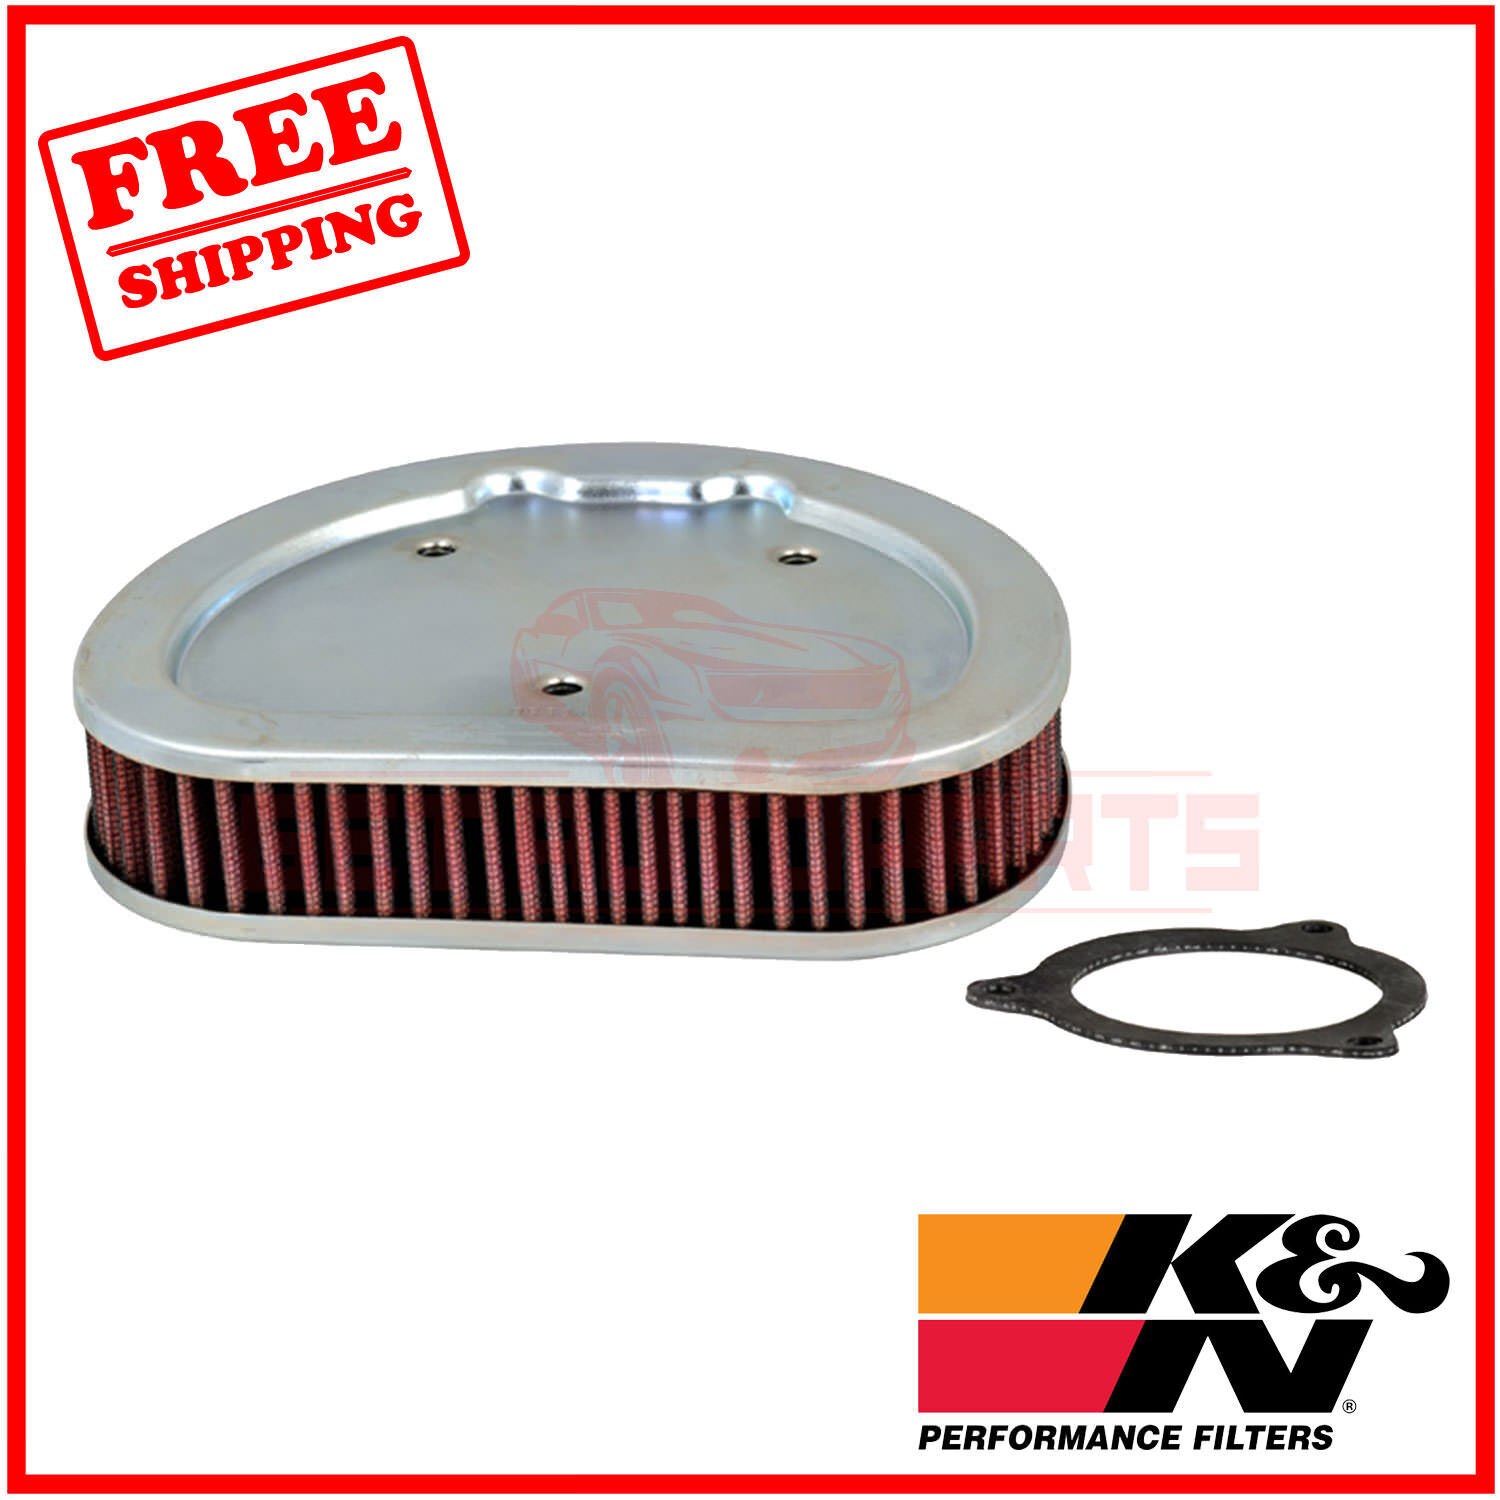 K&N Replacement Air Filter fits Harley Davidson FLHT Electra Glide 2008-09